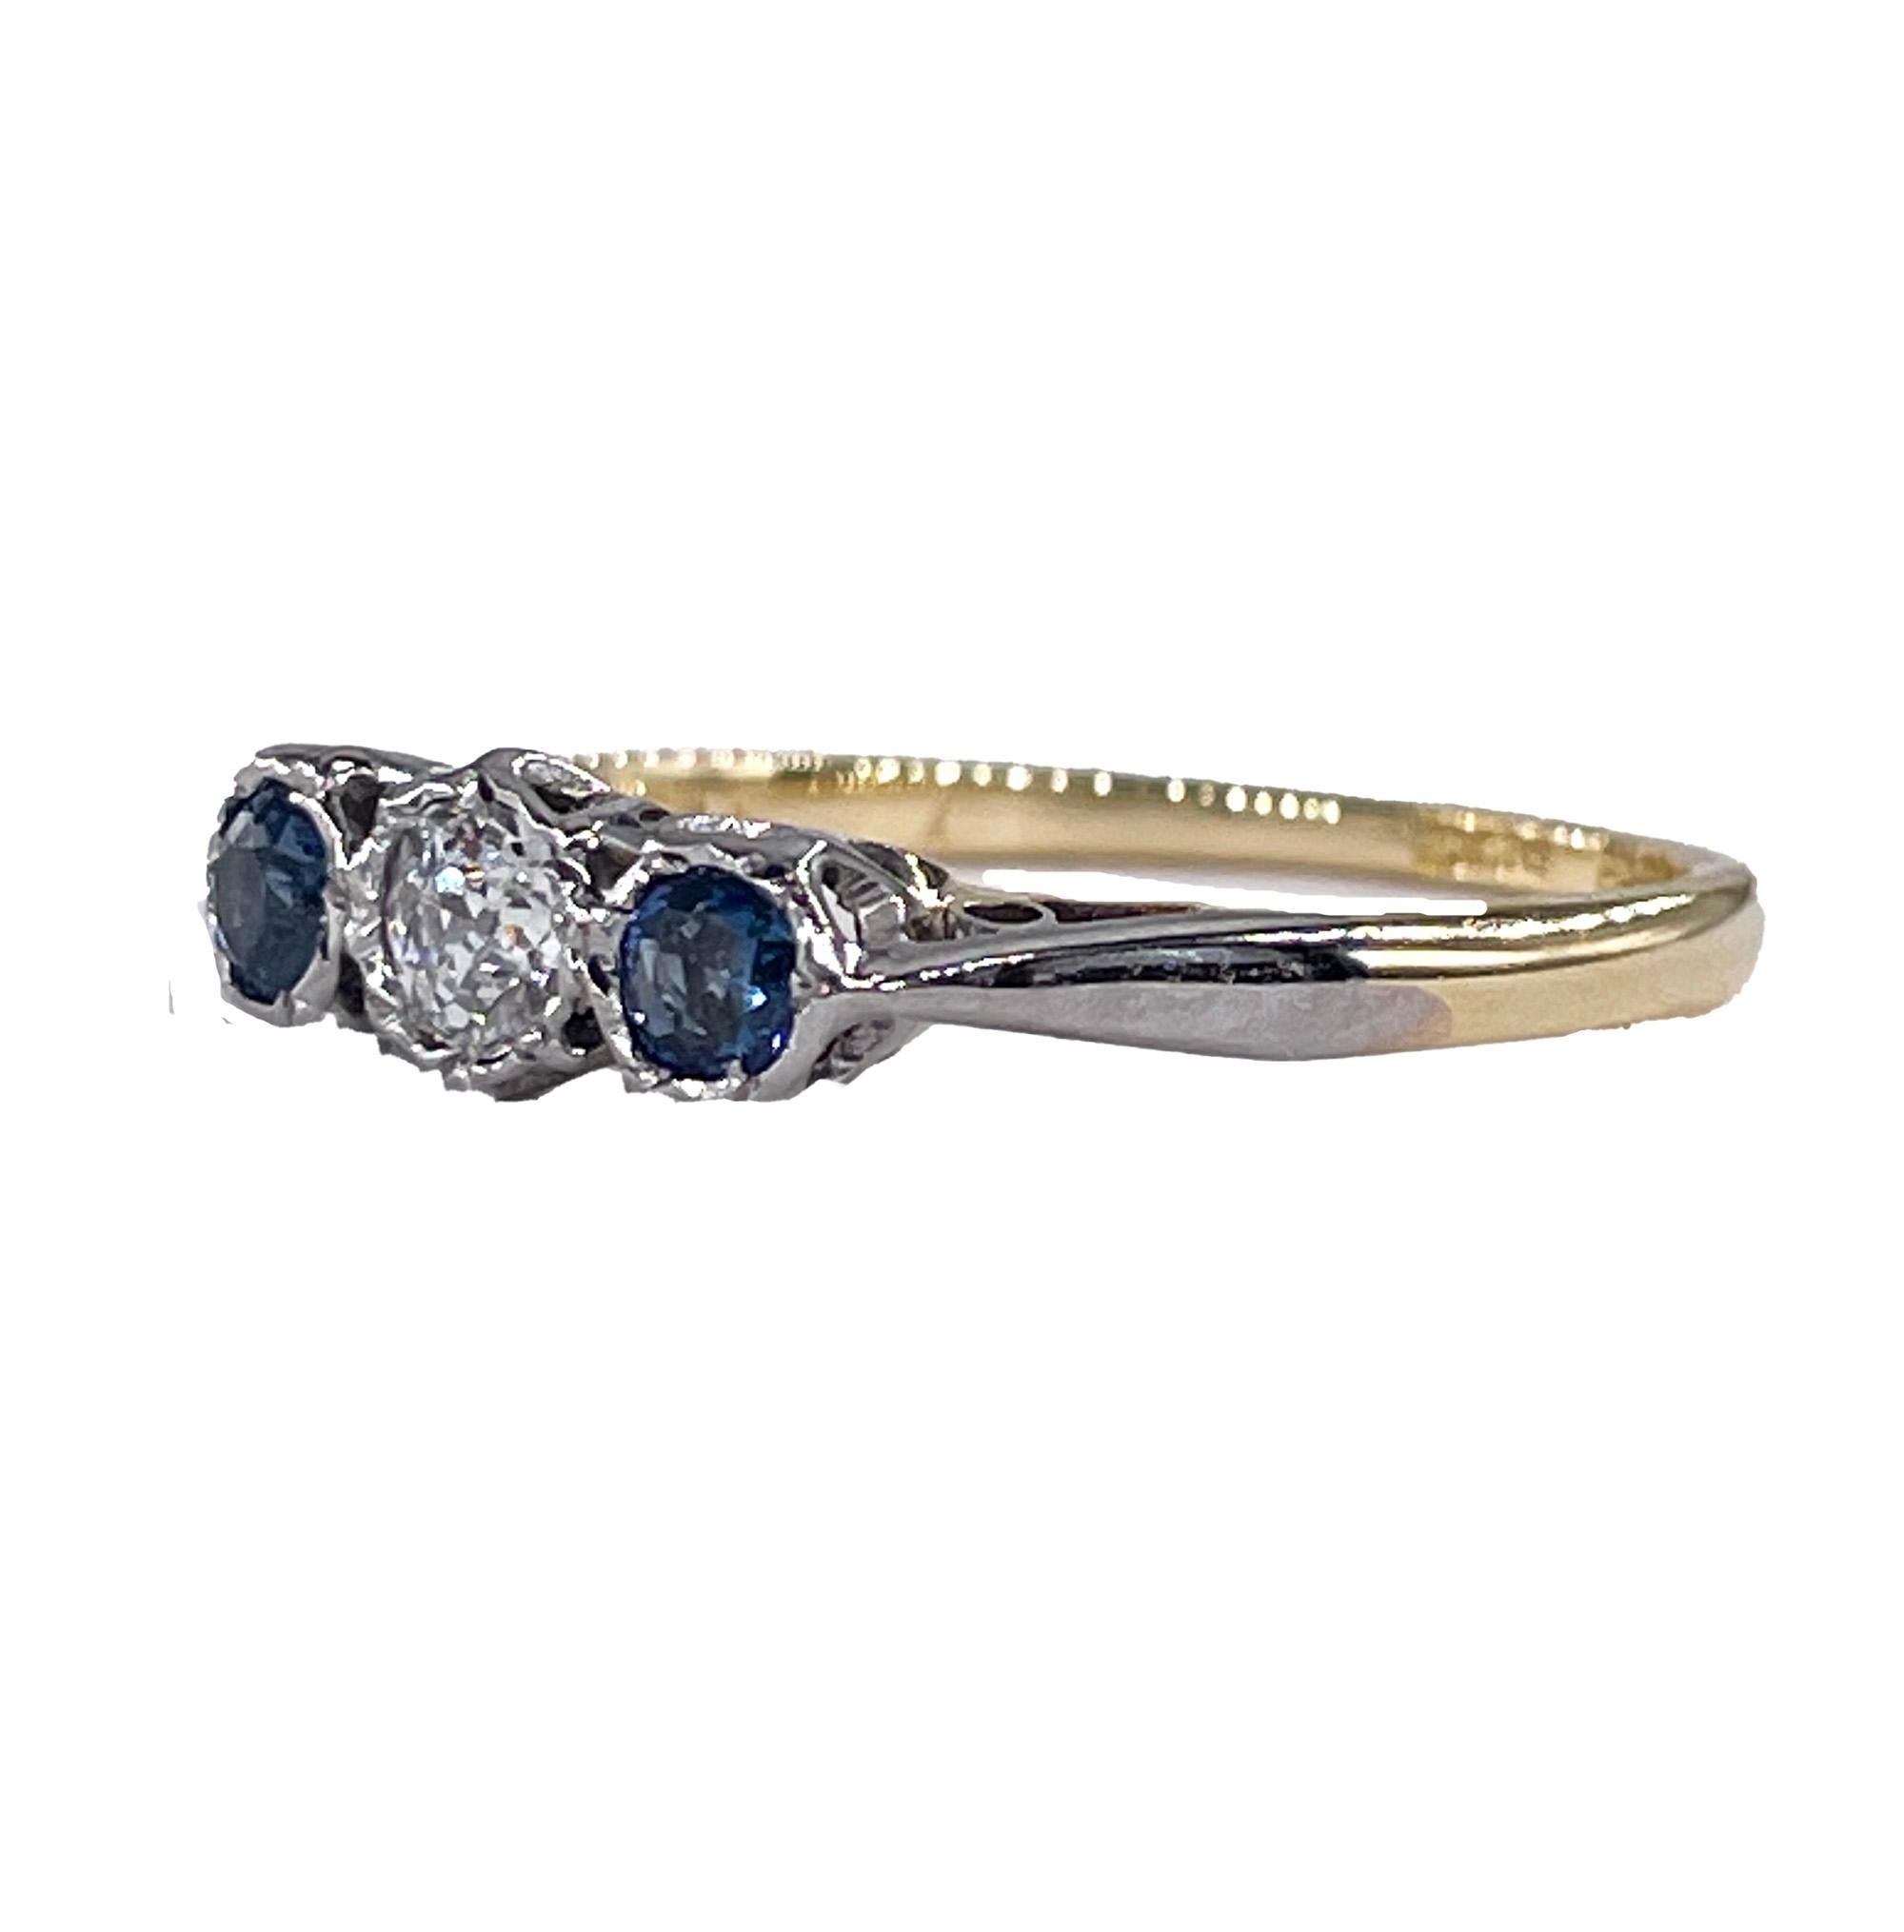 Art Deco Antique Engagement Wedding Anniversary  Three Stone Sapphire and Diamond Platinum 18K Yellow Gold Ring.
This delicate and classic  0.68ctw Three-stone Ring superbly crafted in Platinum and 18 karat Yellow Gold showcasing bright Blue